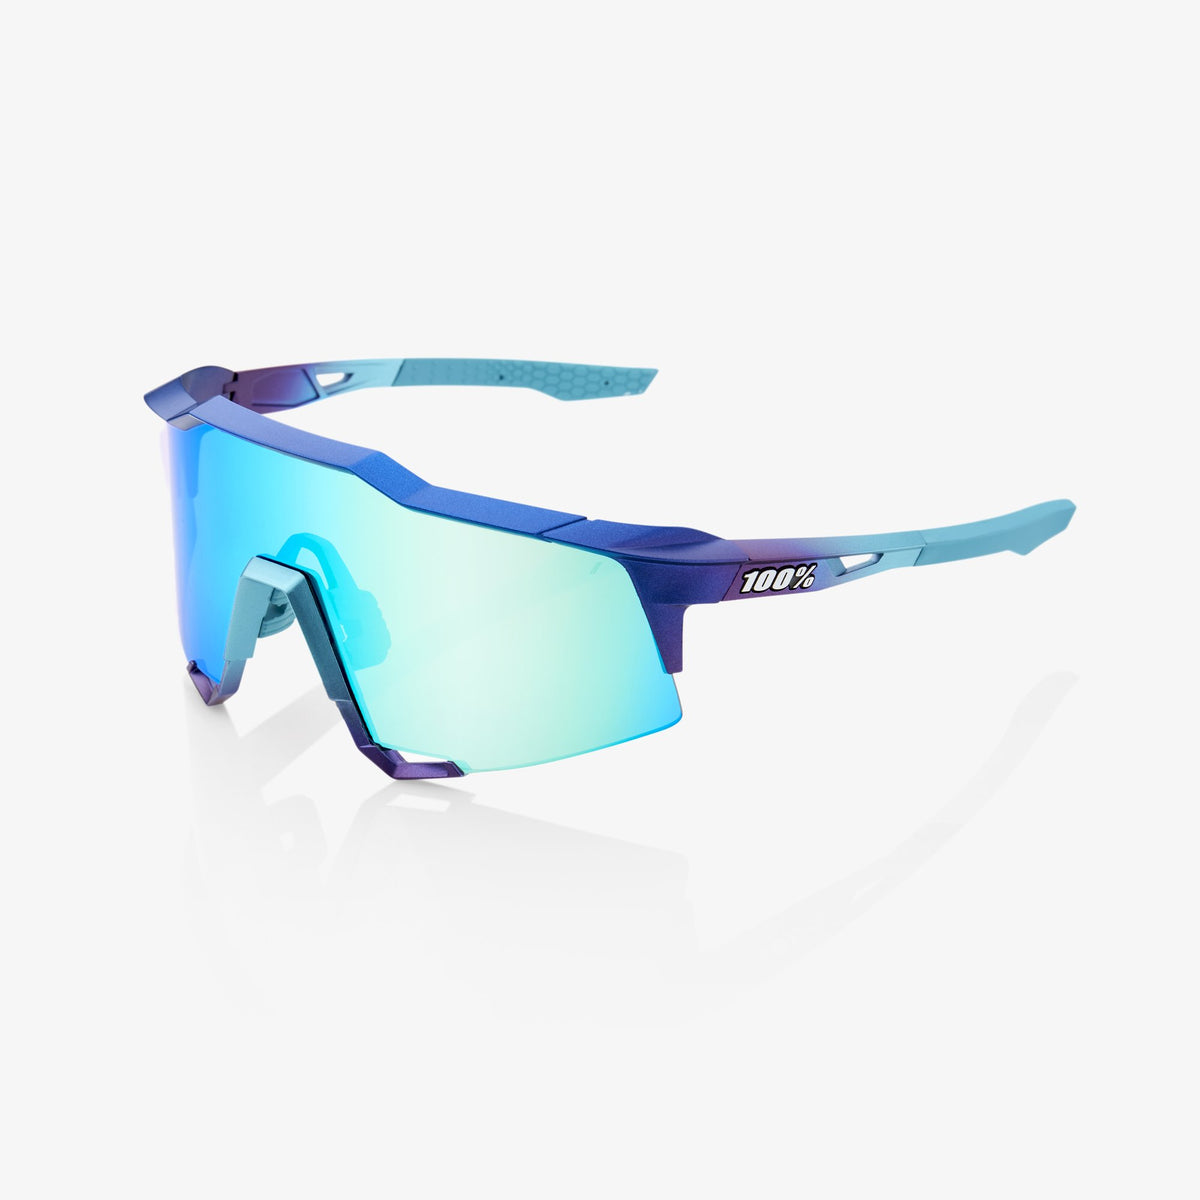 Best running sunglasses in 2023 for protection, comfort and style